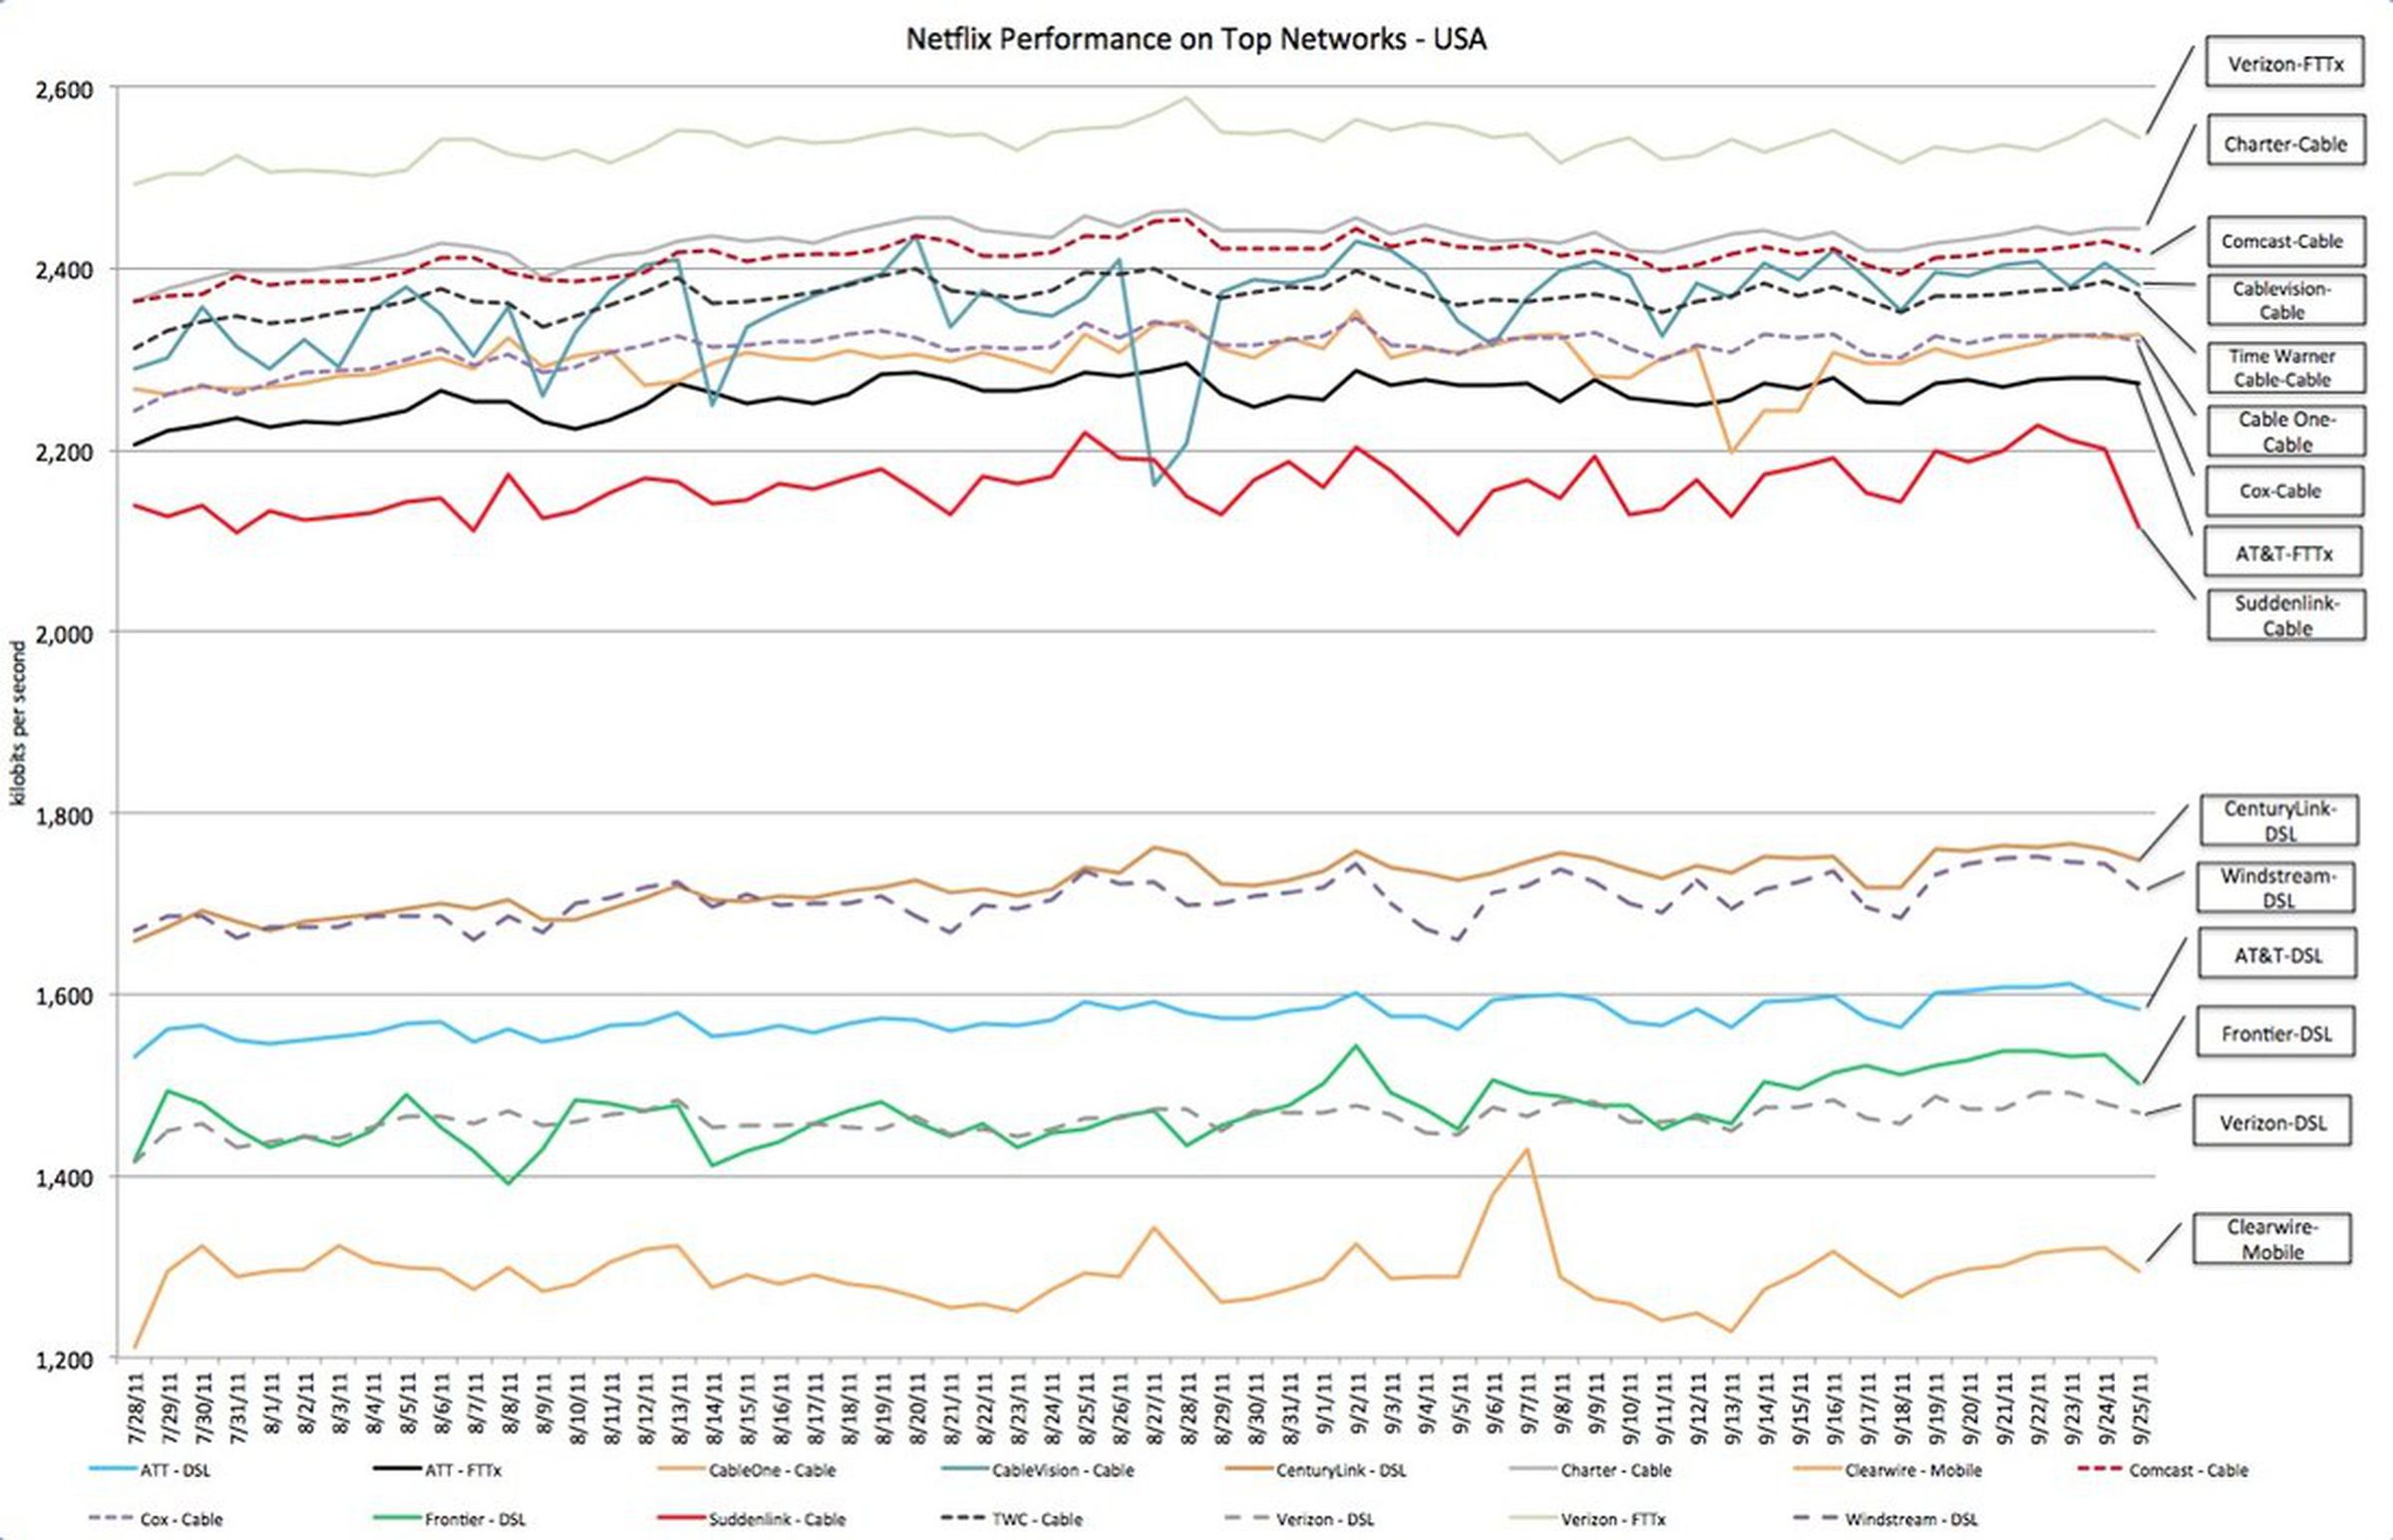 Netflix performance on top networks